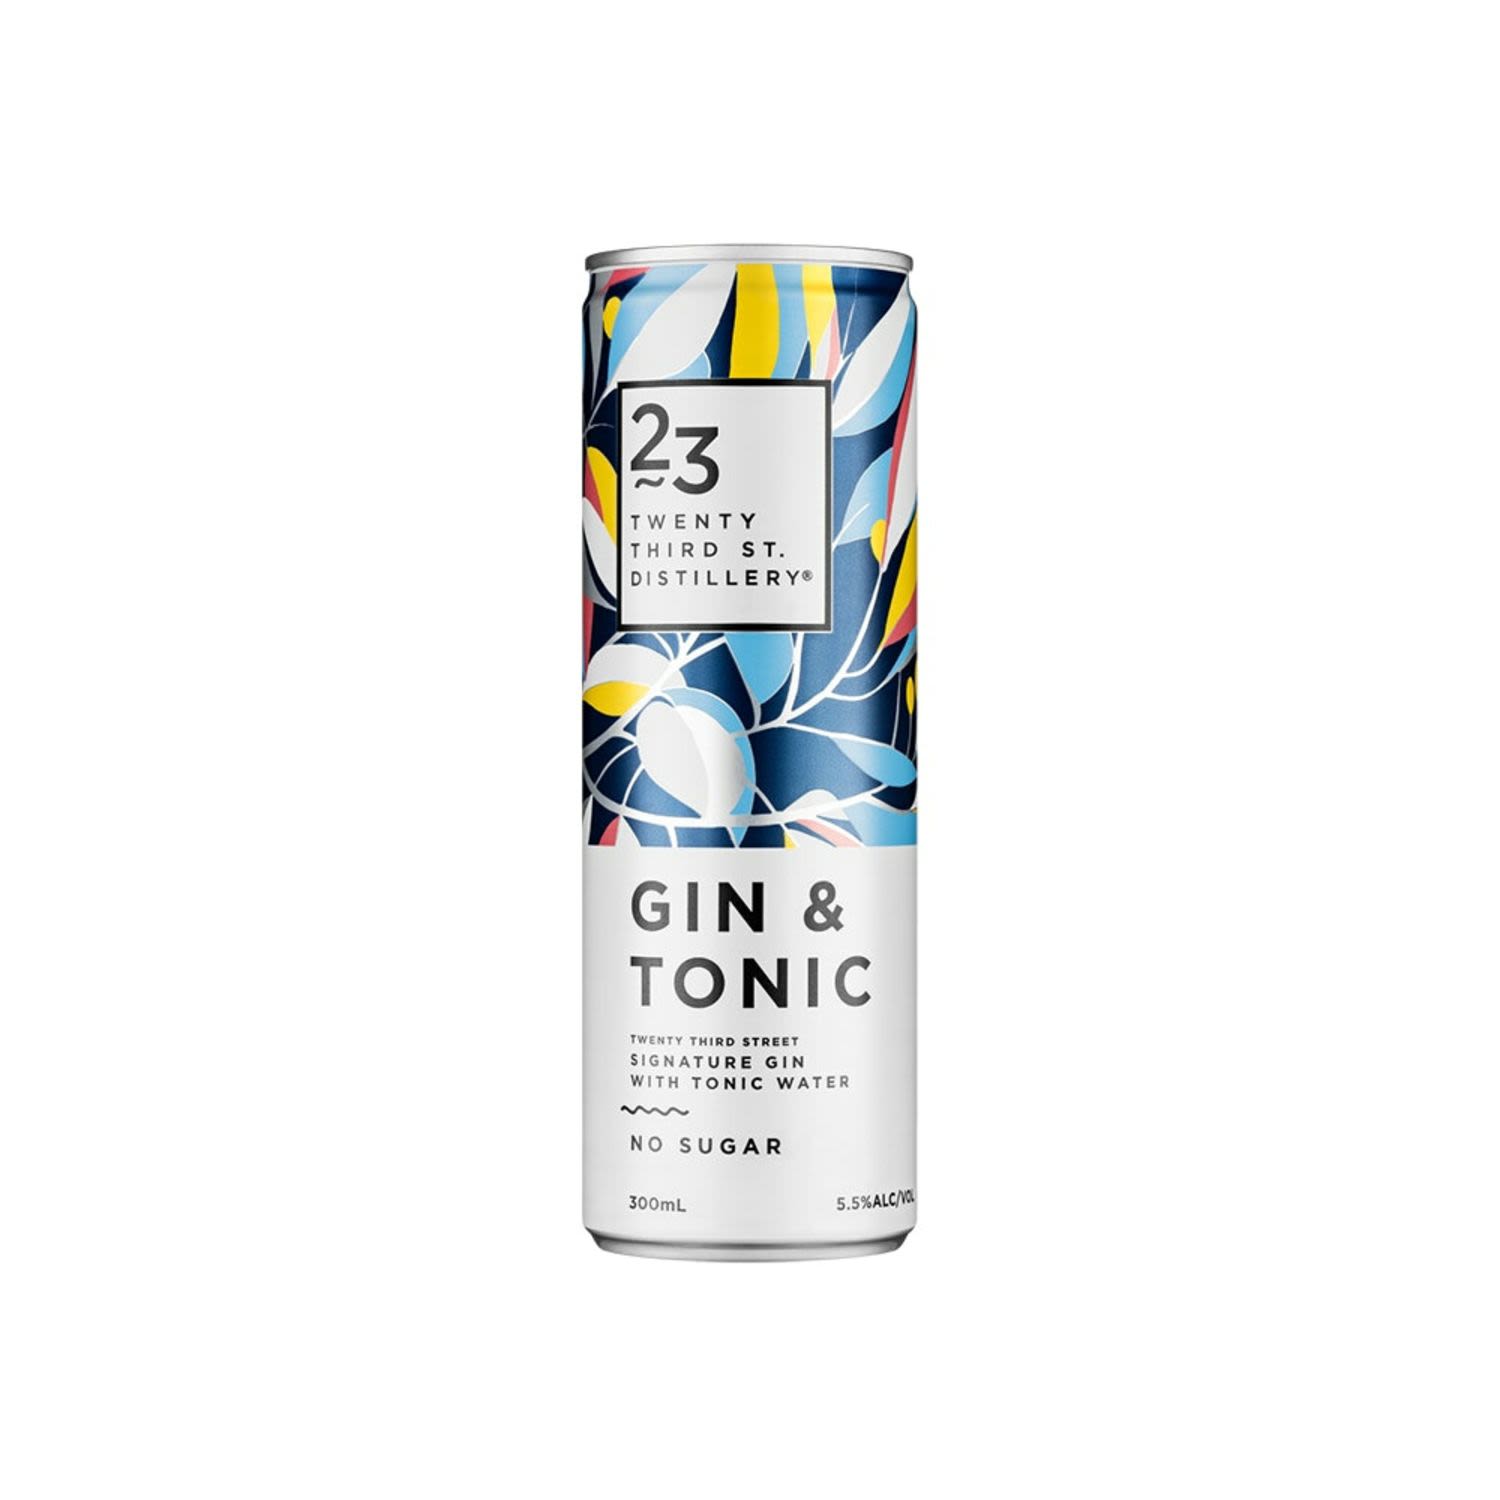 Vibrant, dimensional and sparkling. A tonic for the more demanding palate. Classic bitterness and a calculated hint of sweetness hum along with the Riverland citrus and aromatics of our Signature Gin.<br /> <br />Alcohol Volume: 5.50%<br /><br />Pack Format: Can<br /><br />Standard Drinks: 1.3</br /><br />Pack Type: Can<br />